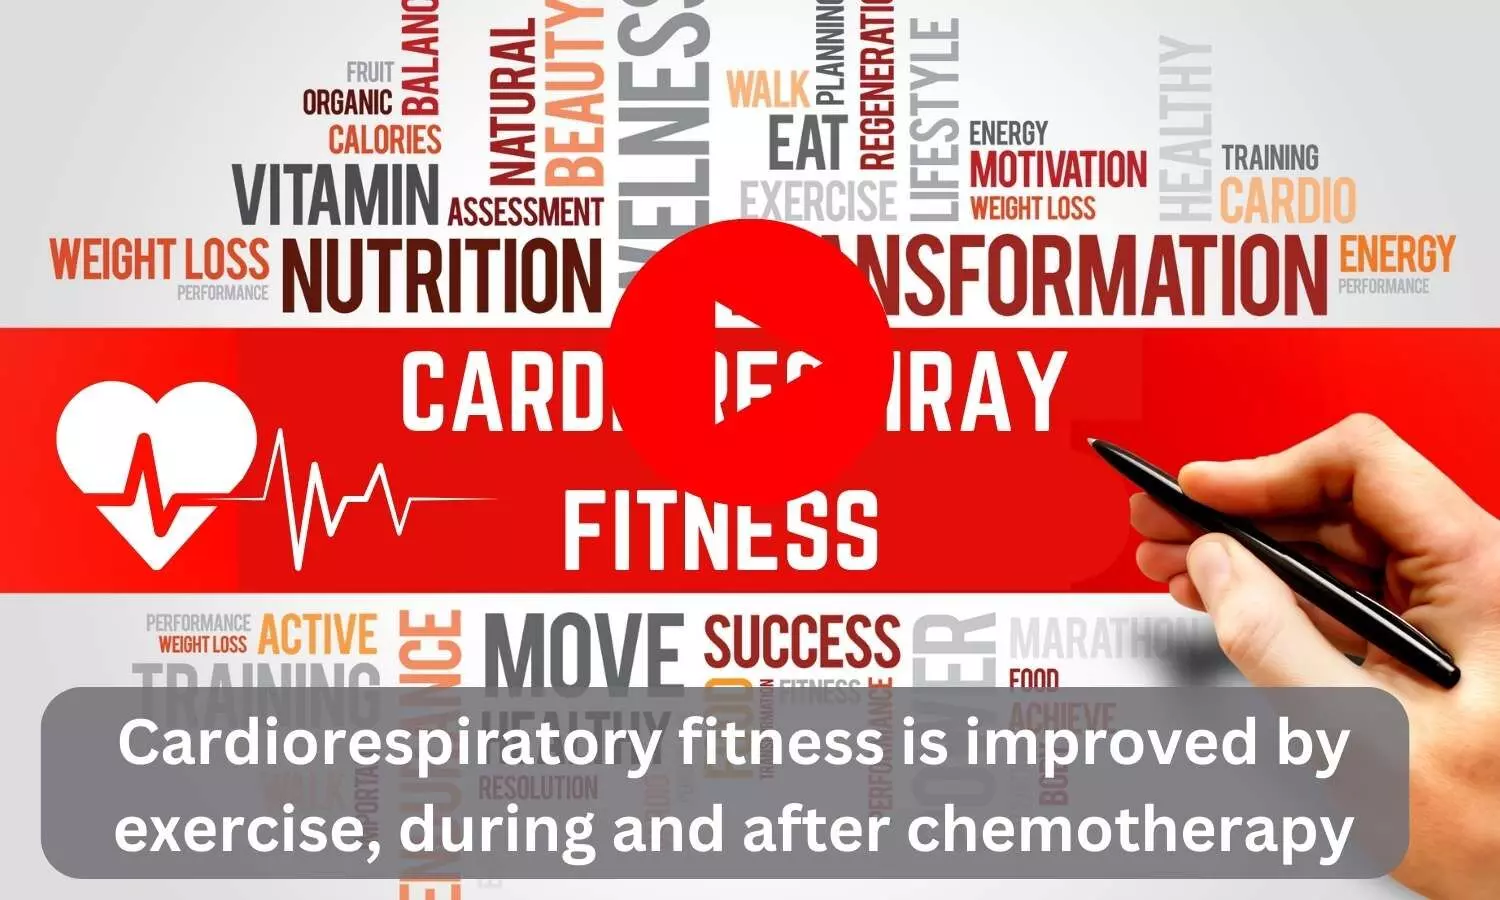 Cardiorespiratory fitness is improved by exercise, during and after chemotherapy